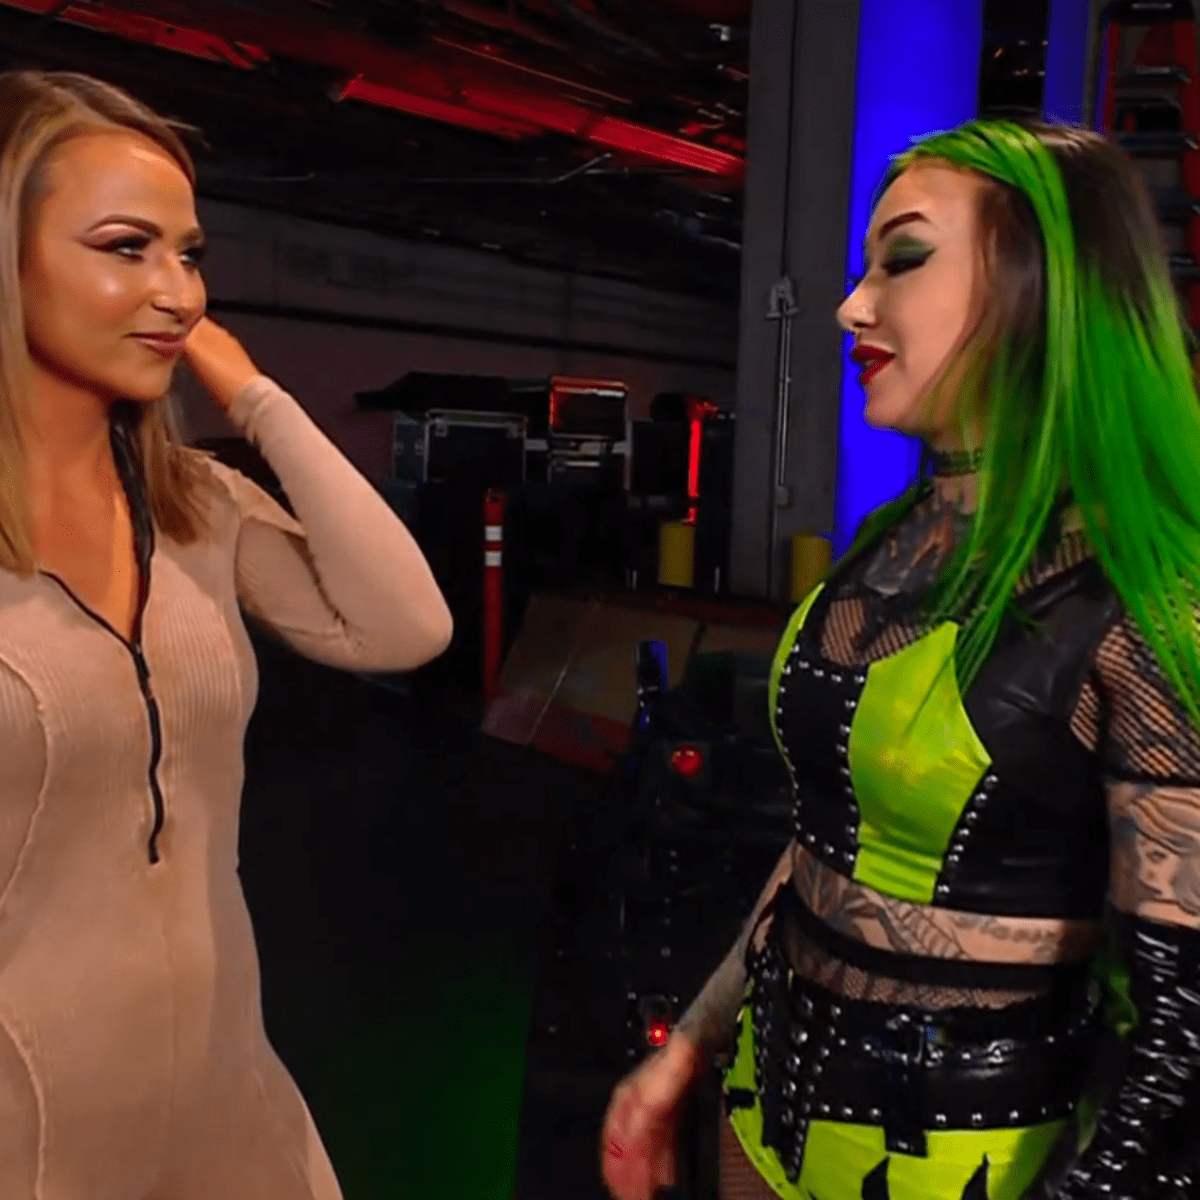 Wwe Emma Porn - WWE begins romantic storyline on Friday Night SmackDown - Wrestling News |  WWE and AEW Results, Spoilers, Rumors & Scoops